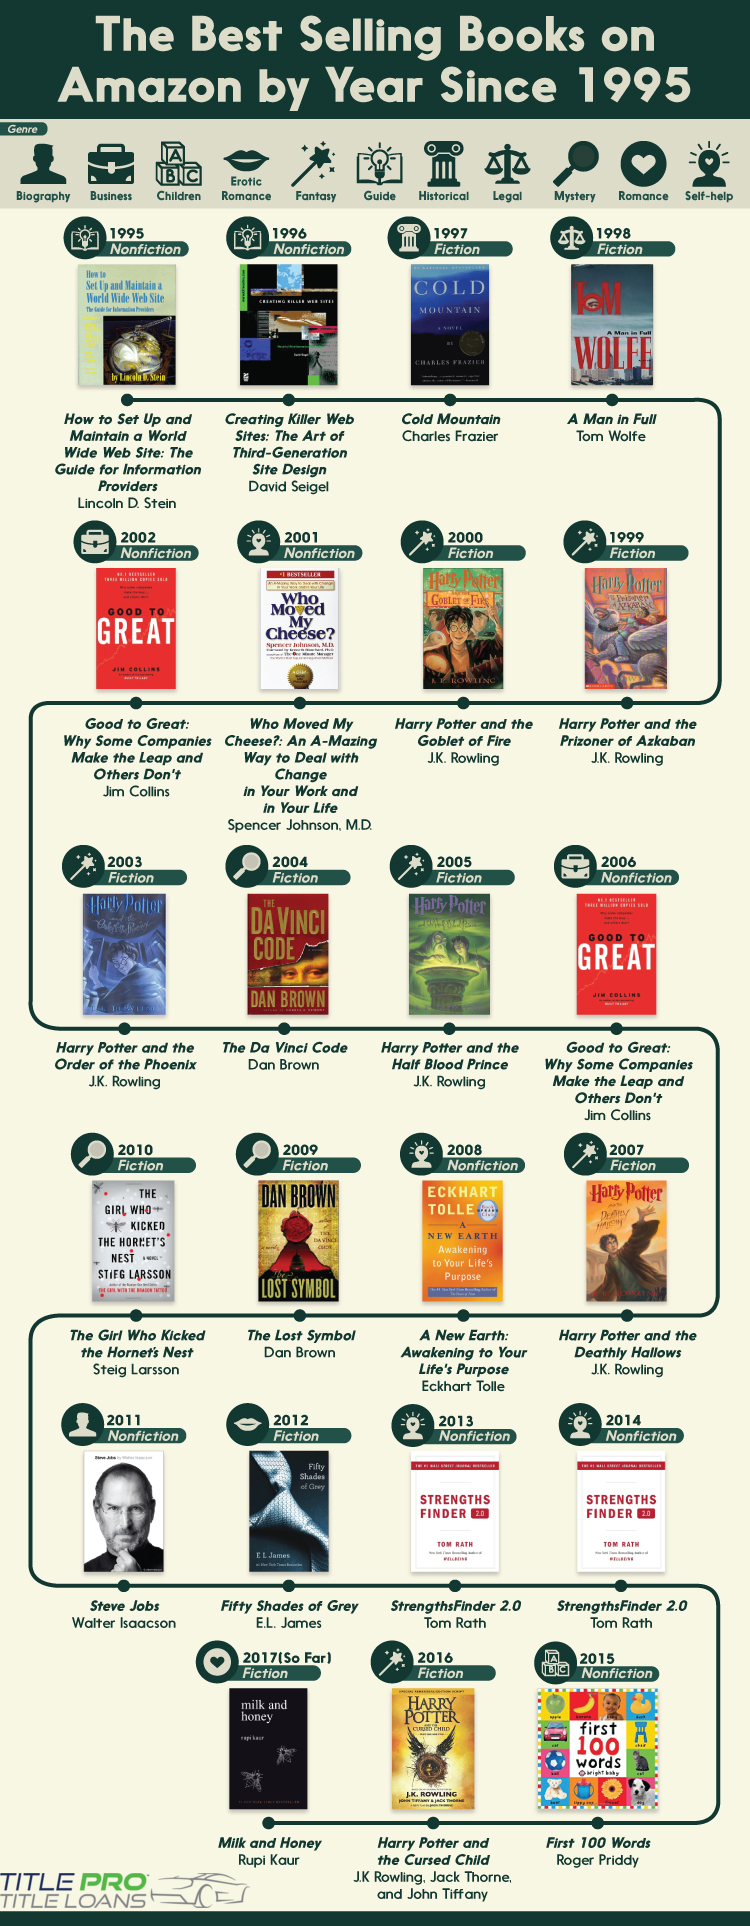 Amazon’s Annual Best-Seller Book List: 1995 to Now - Infographic